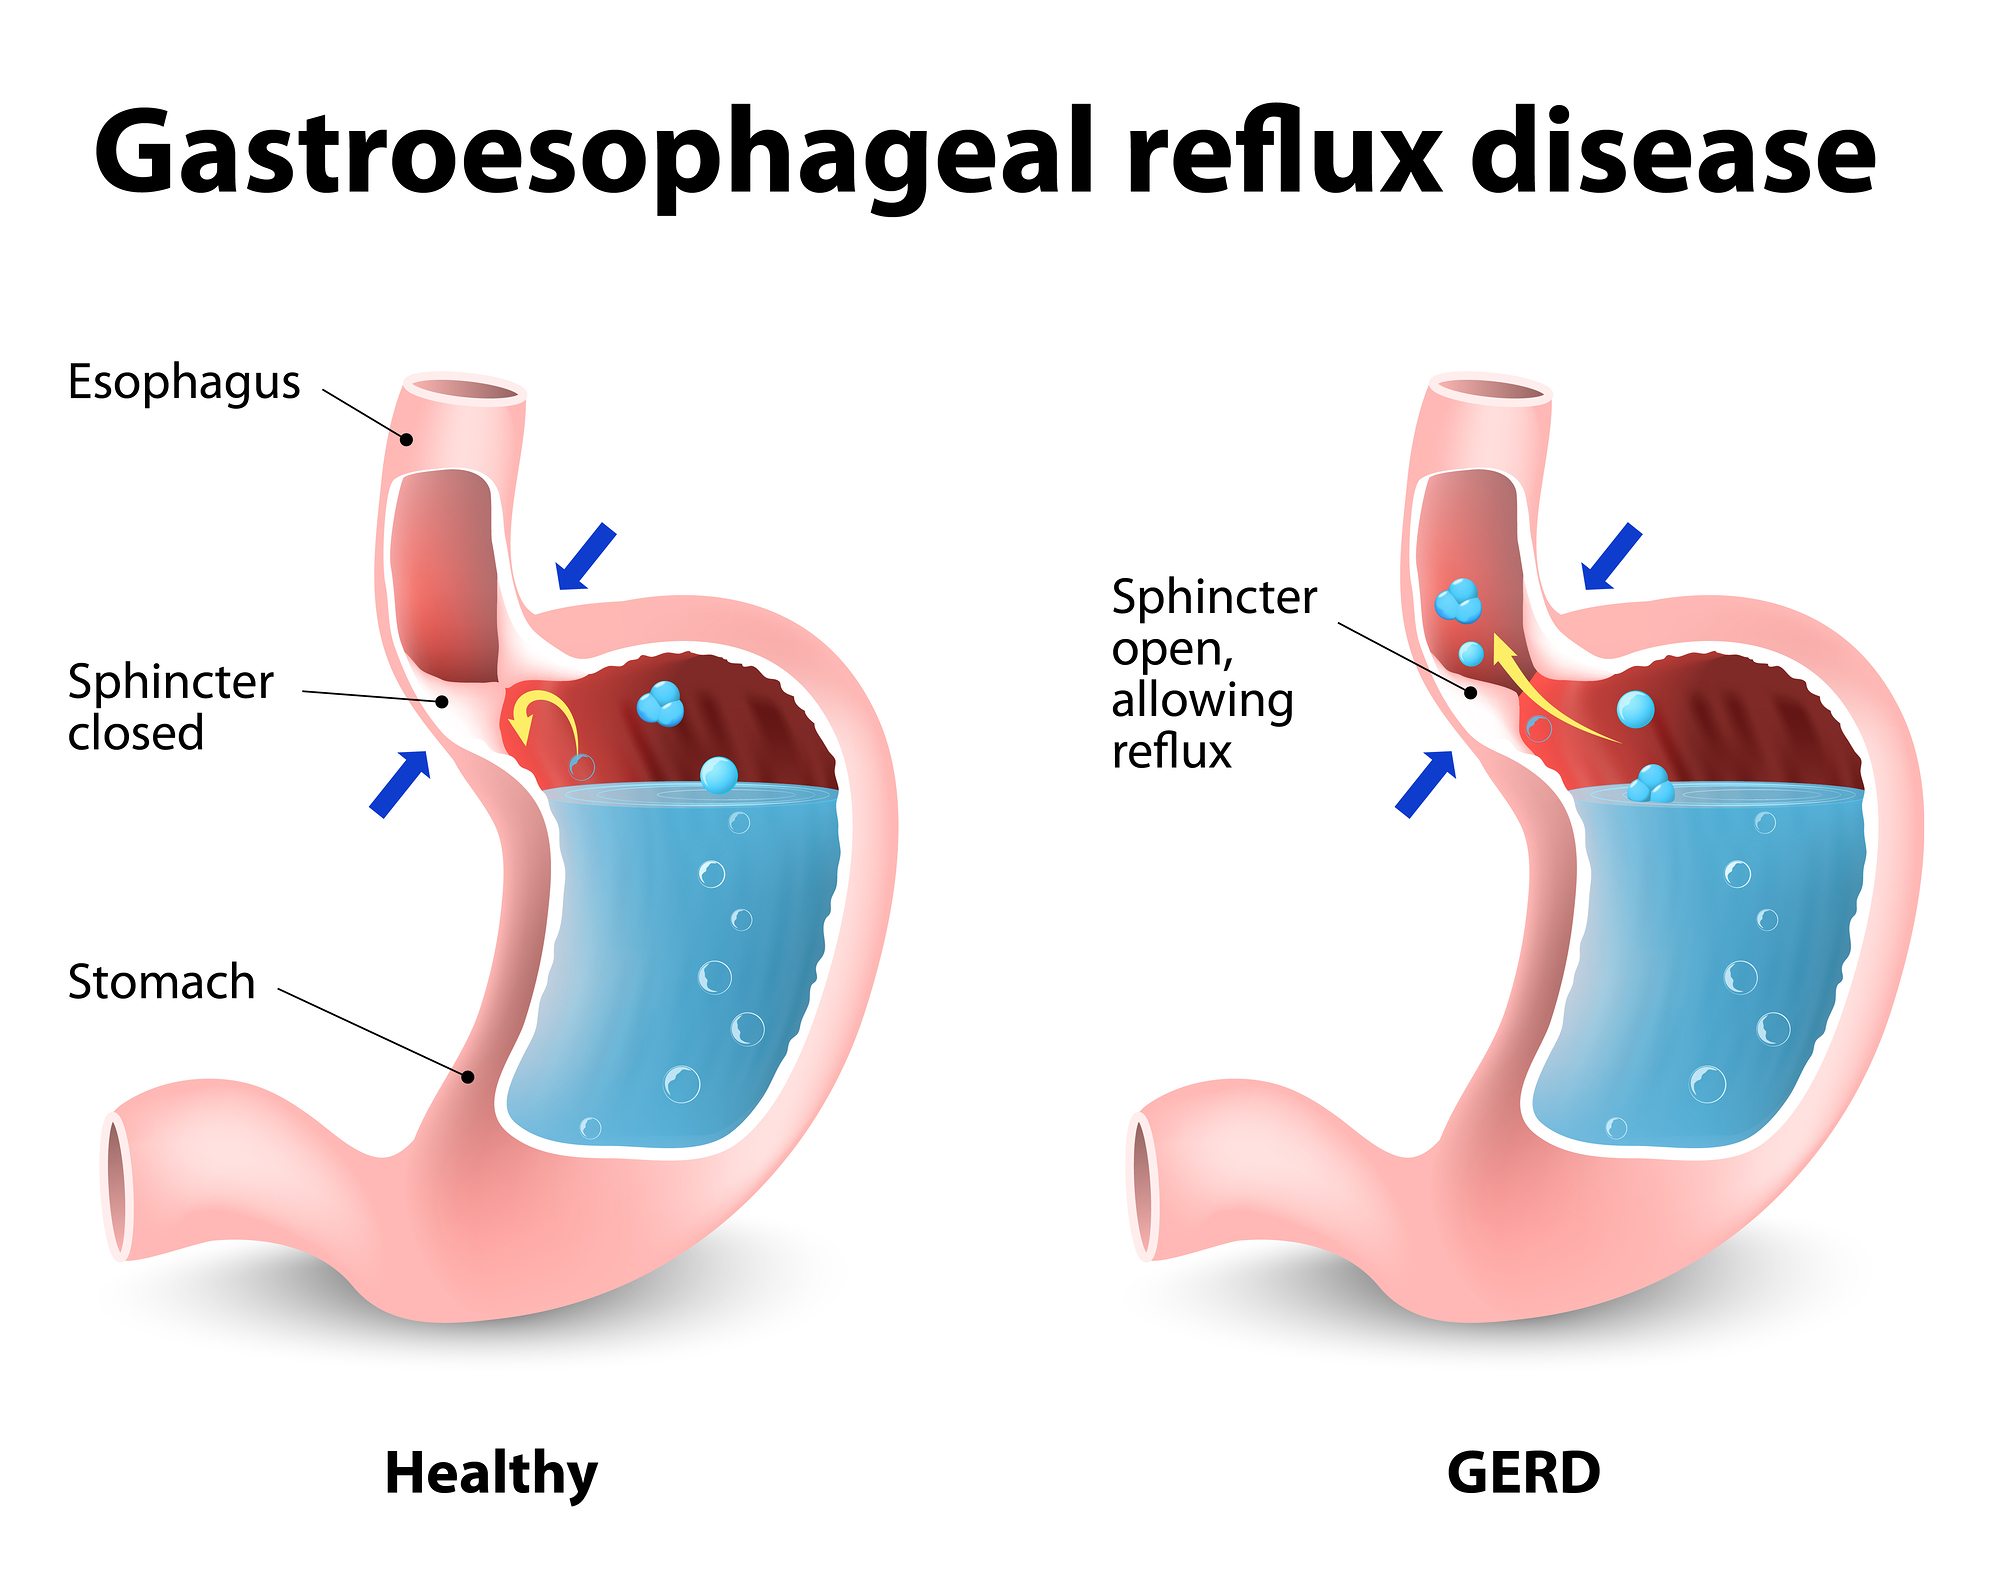 What are the symptoms of an esophagus disease?